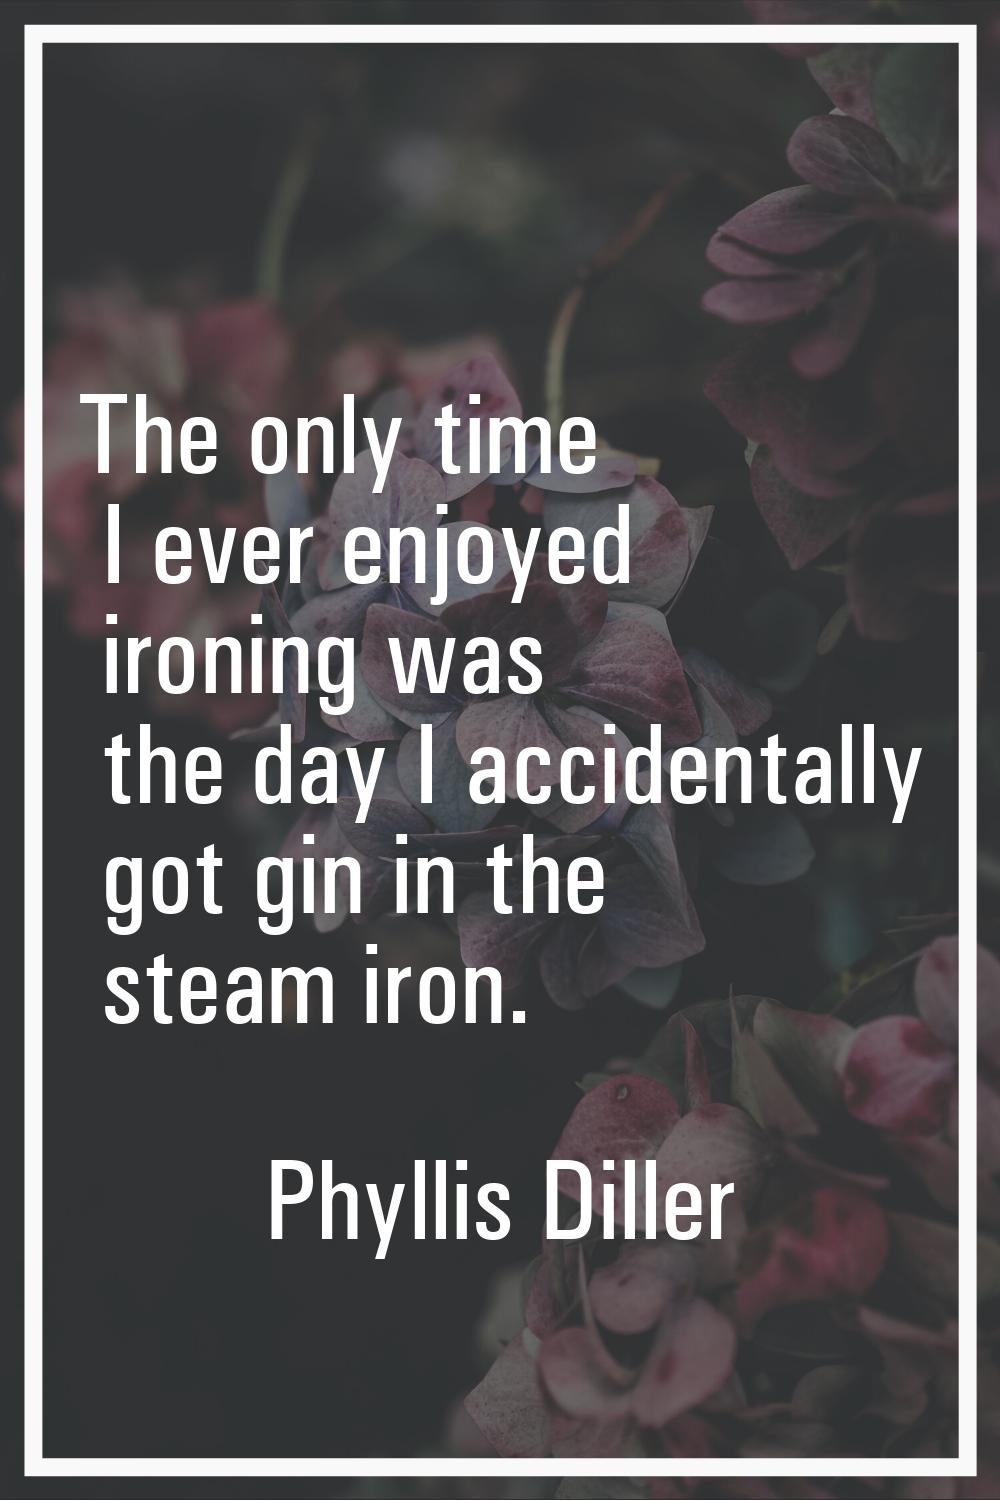 The only time I ever enjoyed ironing was the day I accidentally got gin in the steam iron.